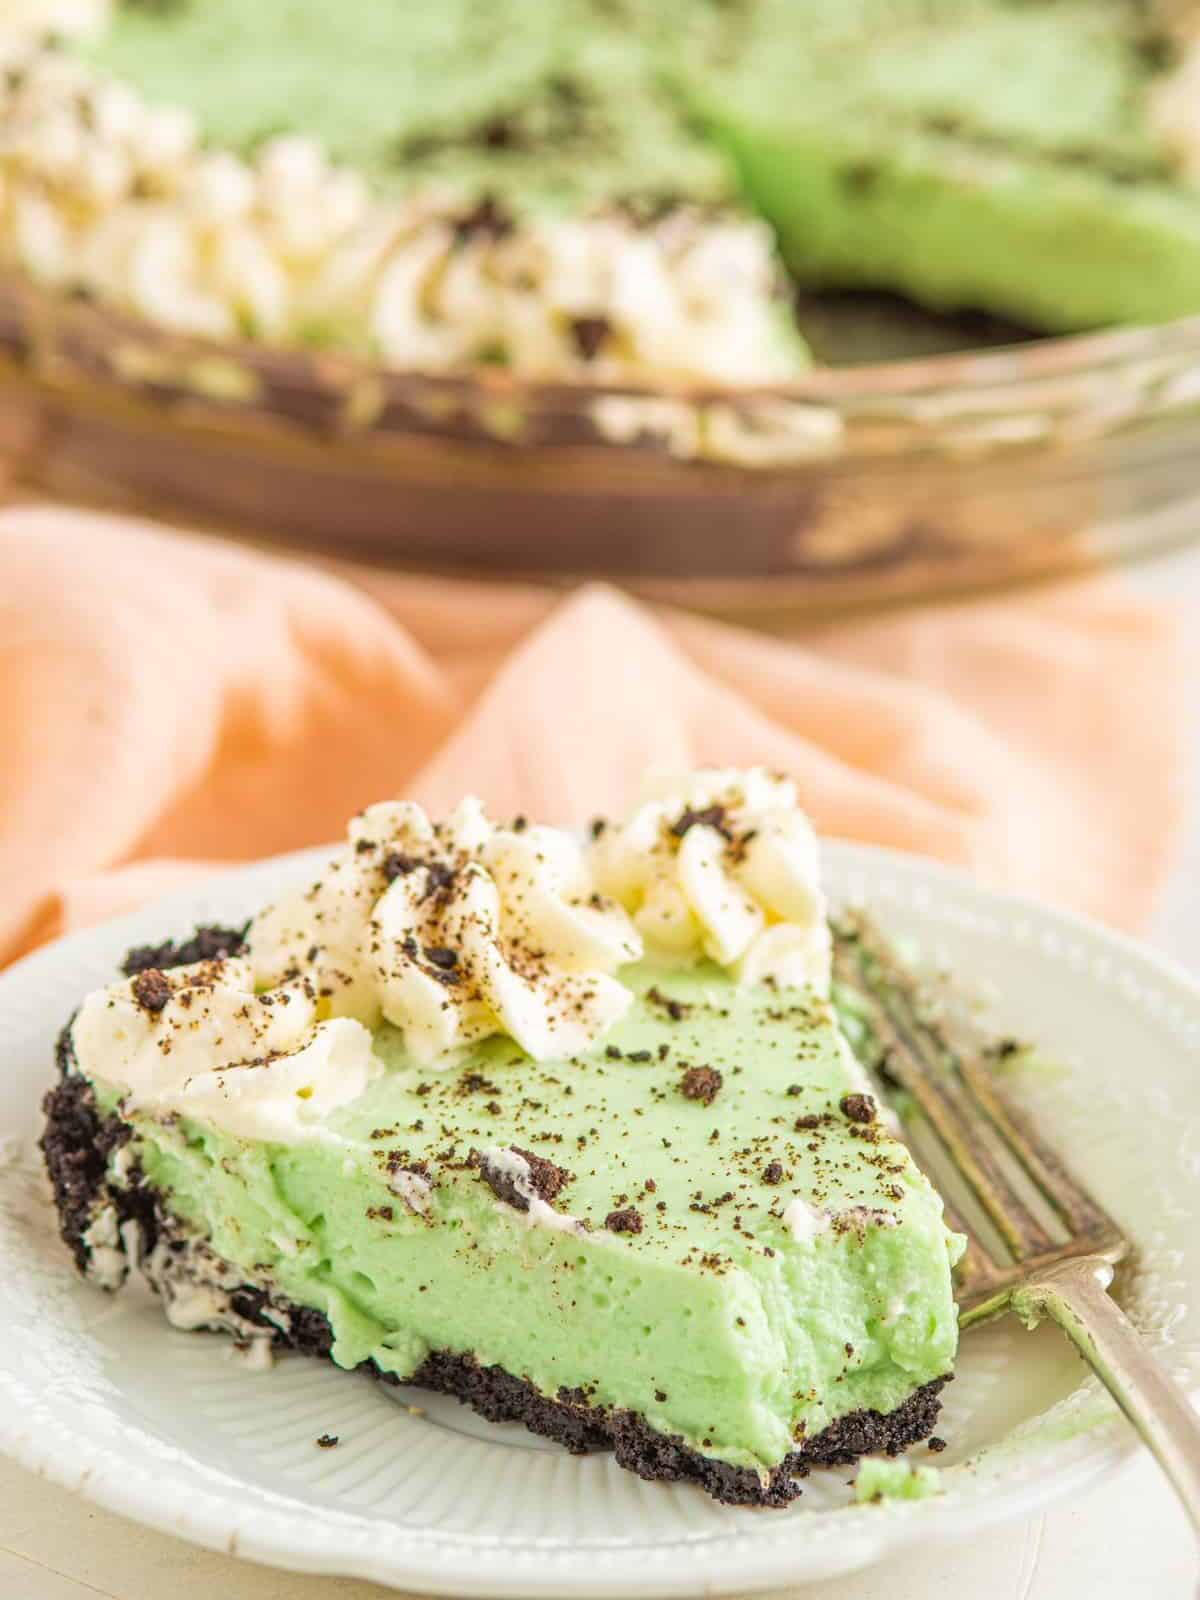 three-quarters view of a partially eaten slice of grasshopper pie on a white plate with a fork.